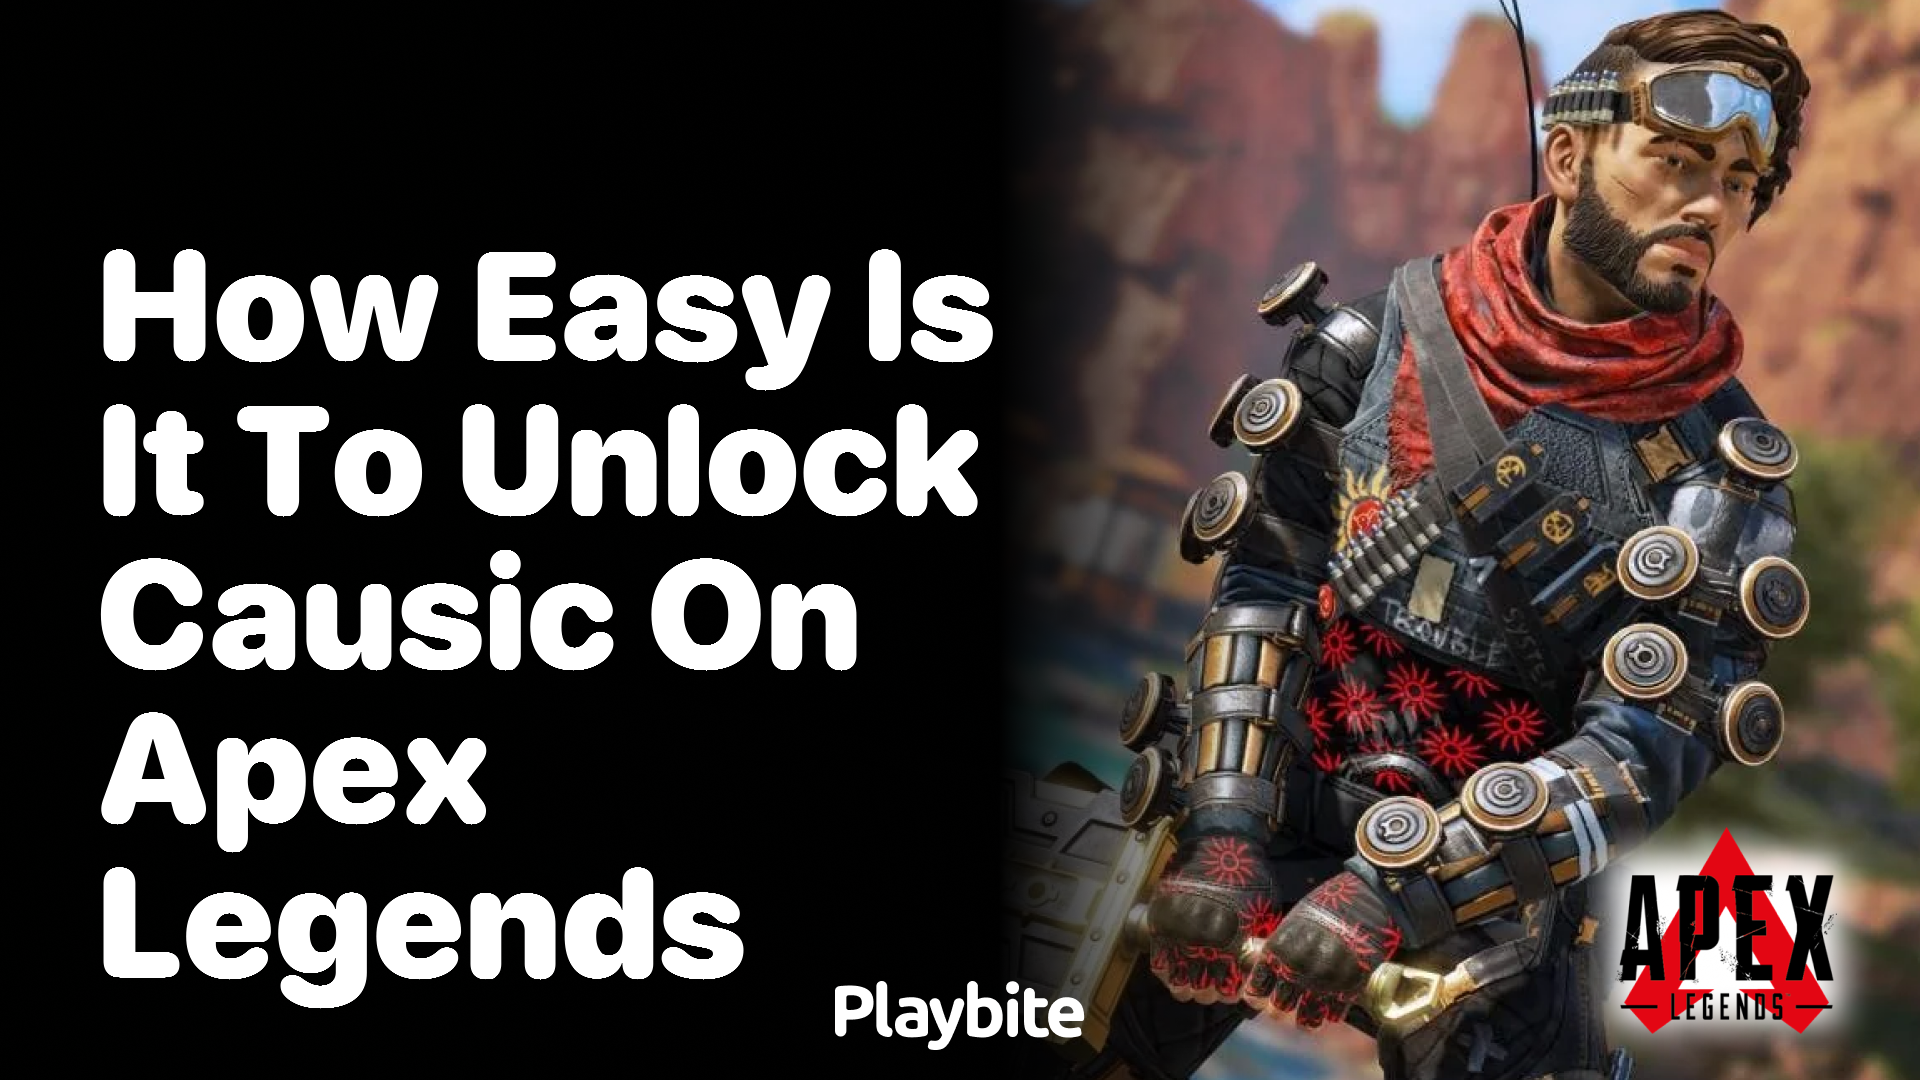 How easy is it to unlock Caustic on Apex Legends?